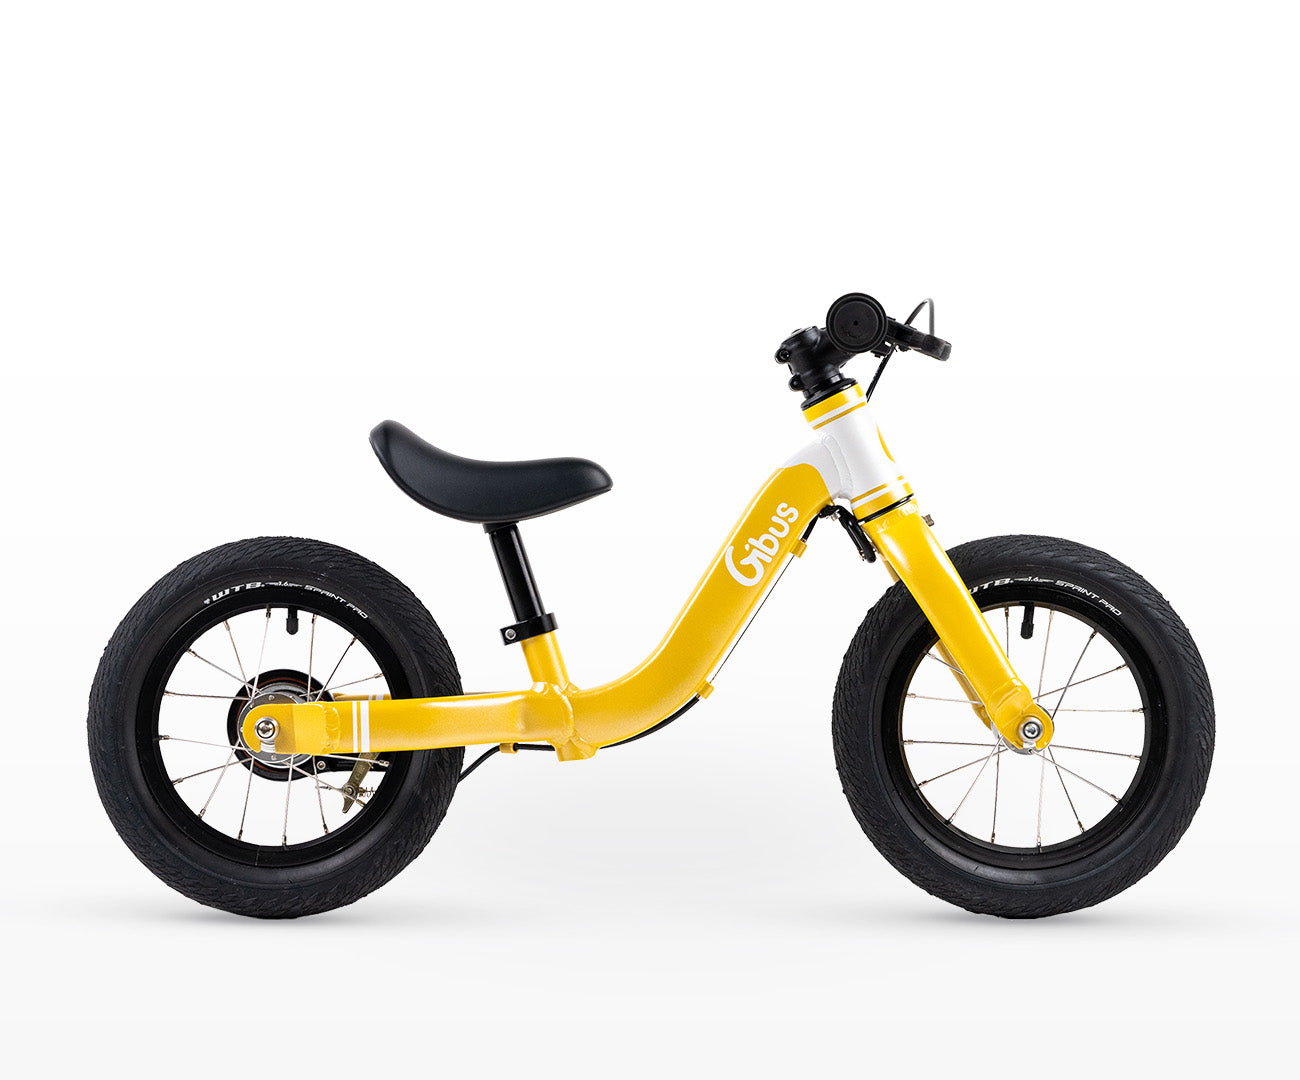 Draisienne 2 ans : comment choisir ? – Gibus Cycles